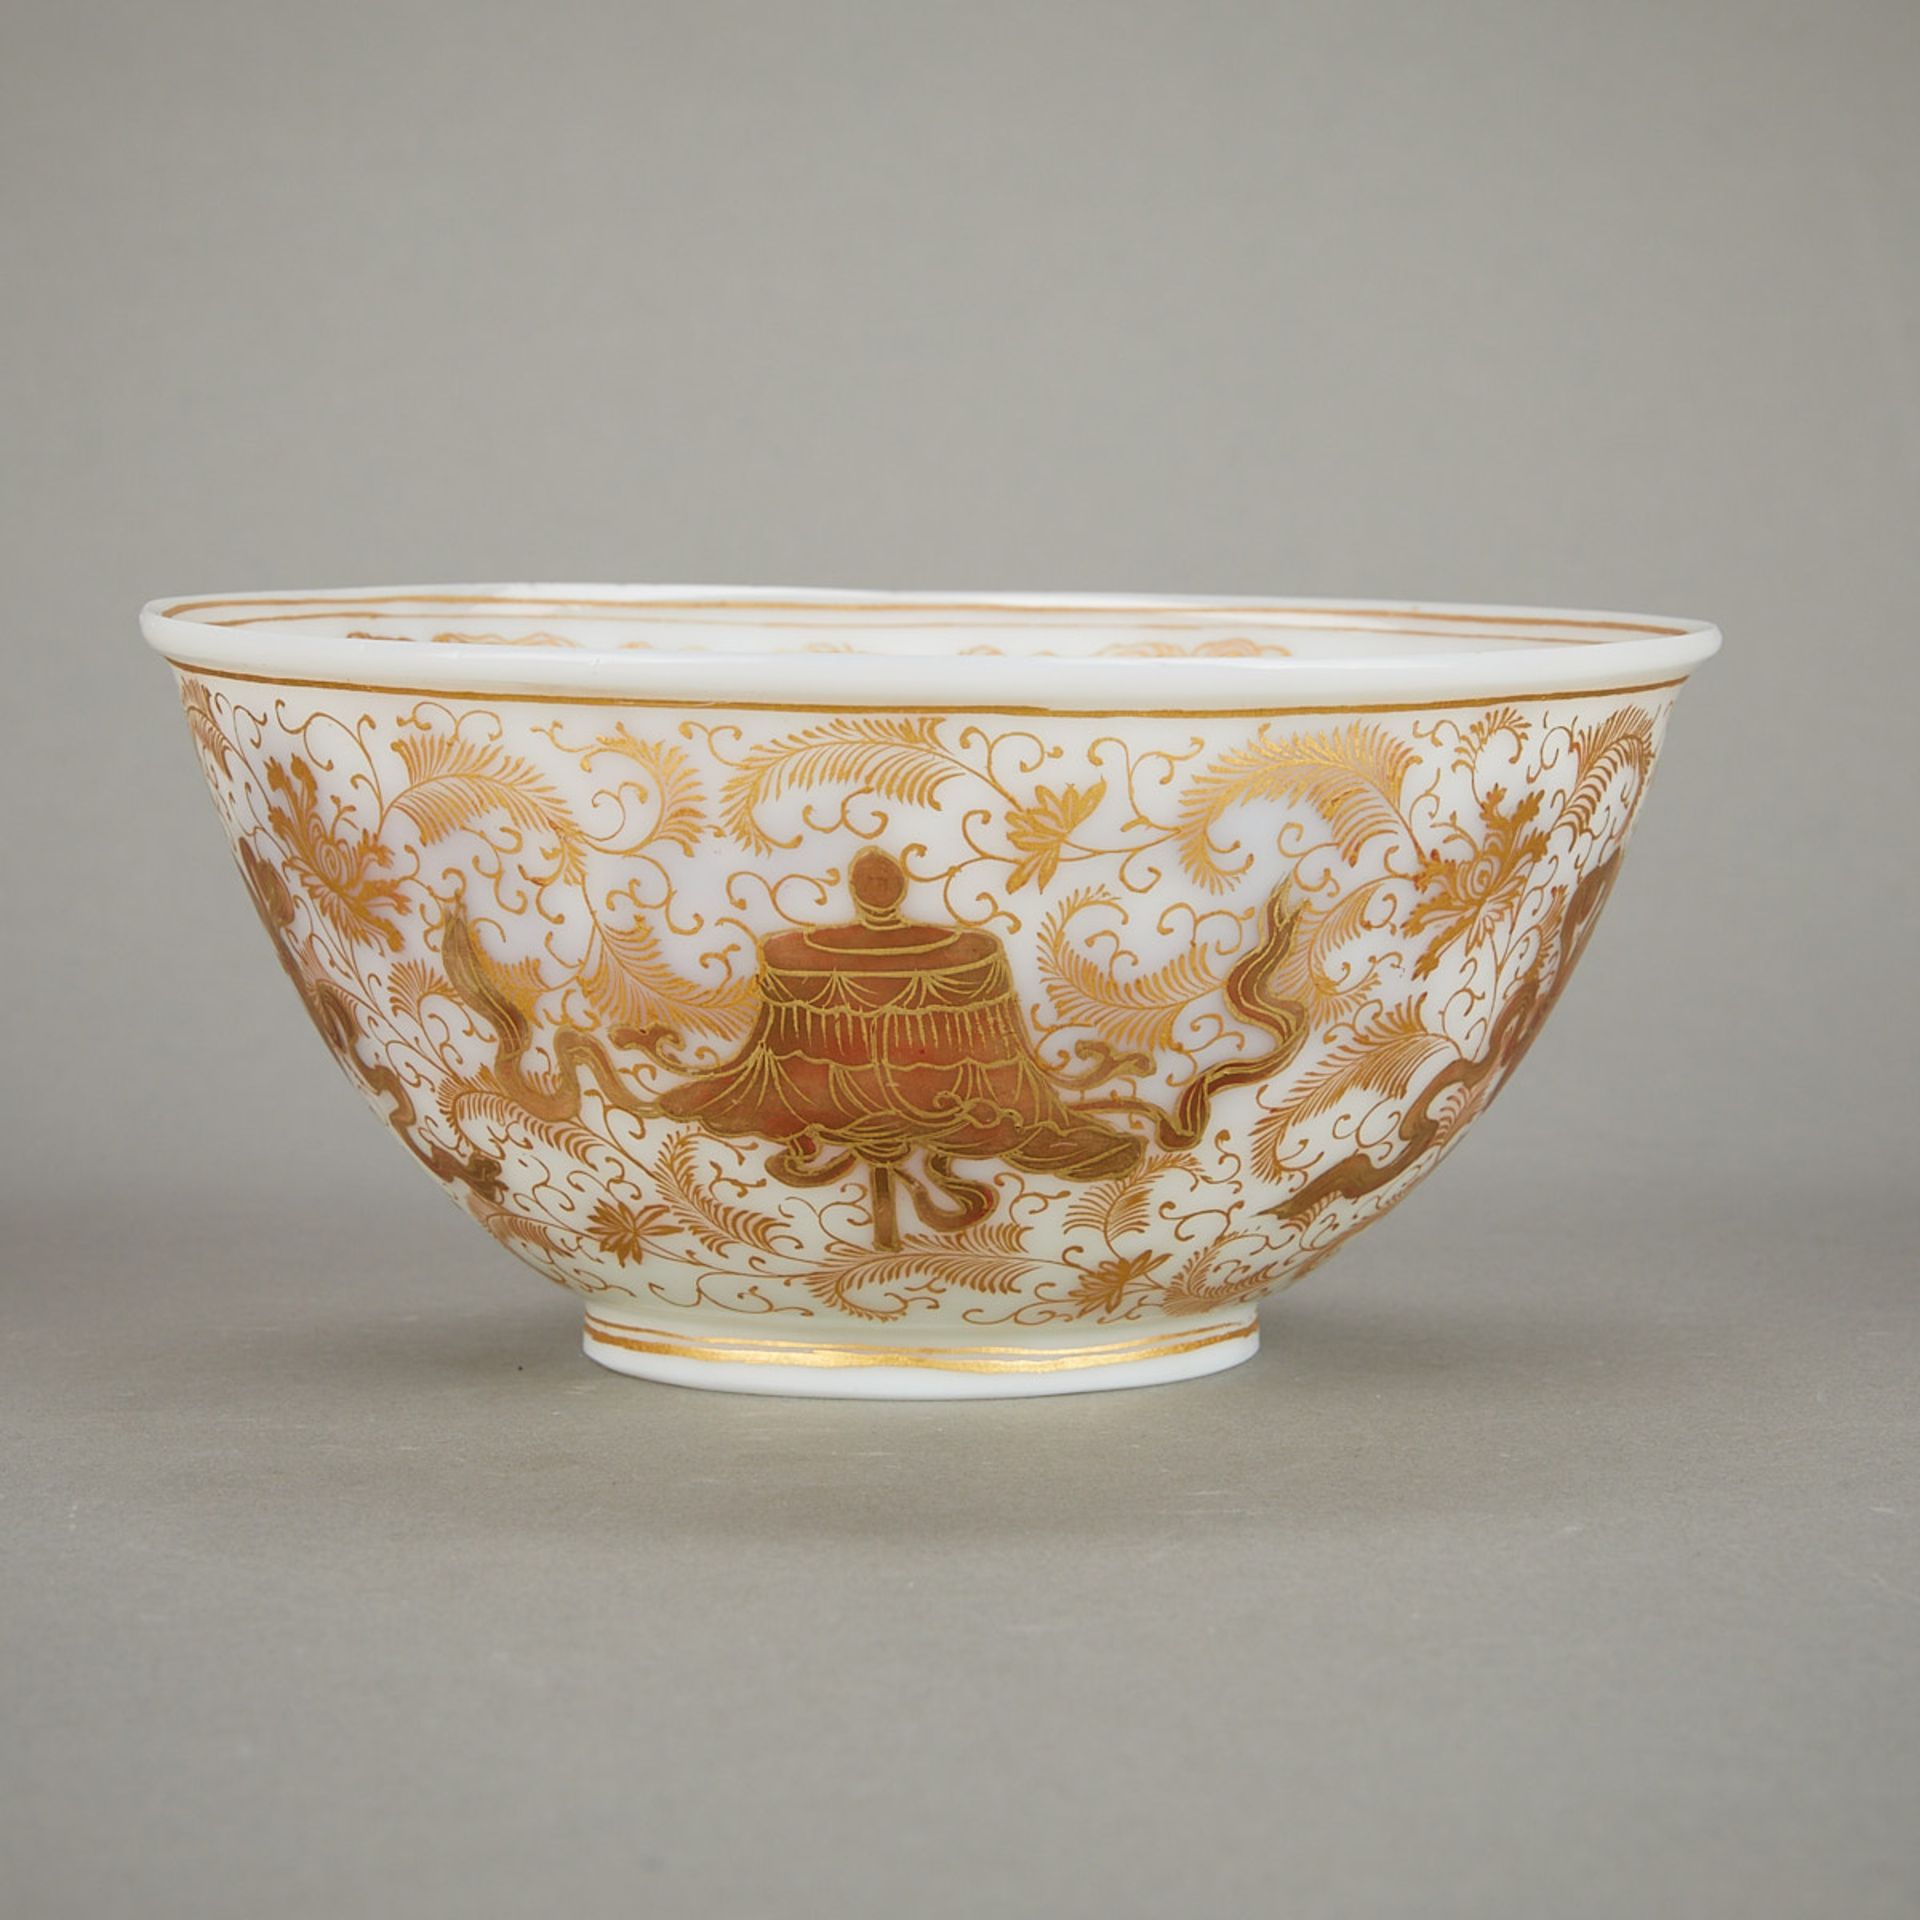 Rare Chinese Gilt Semi-Opaque White Glass Bowl - Image 3 of 16